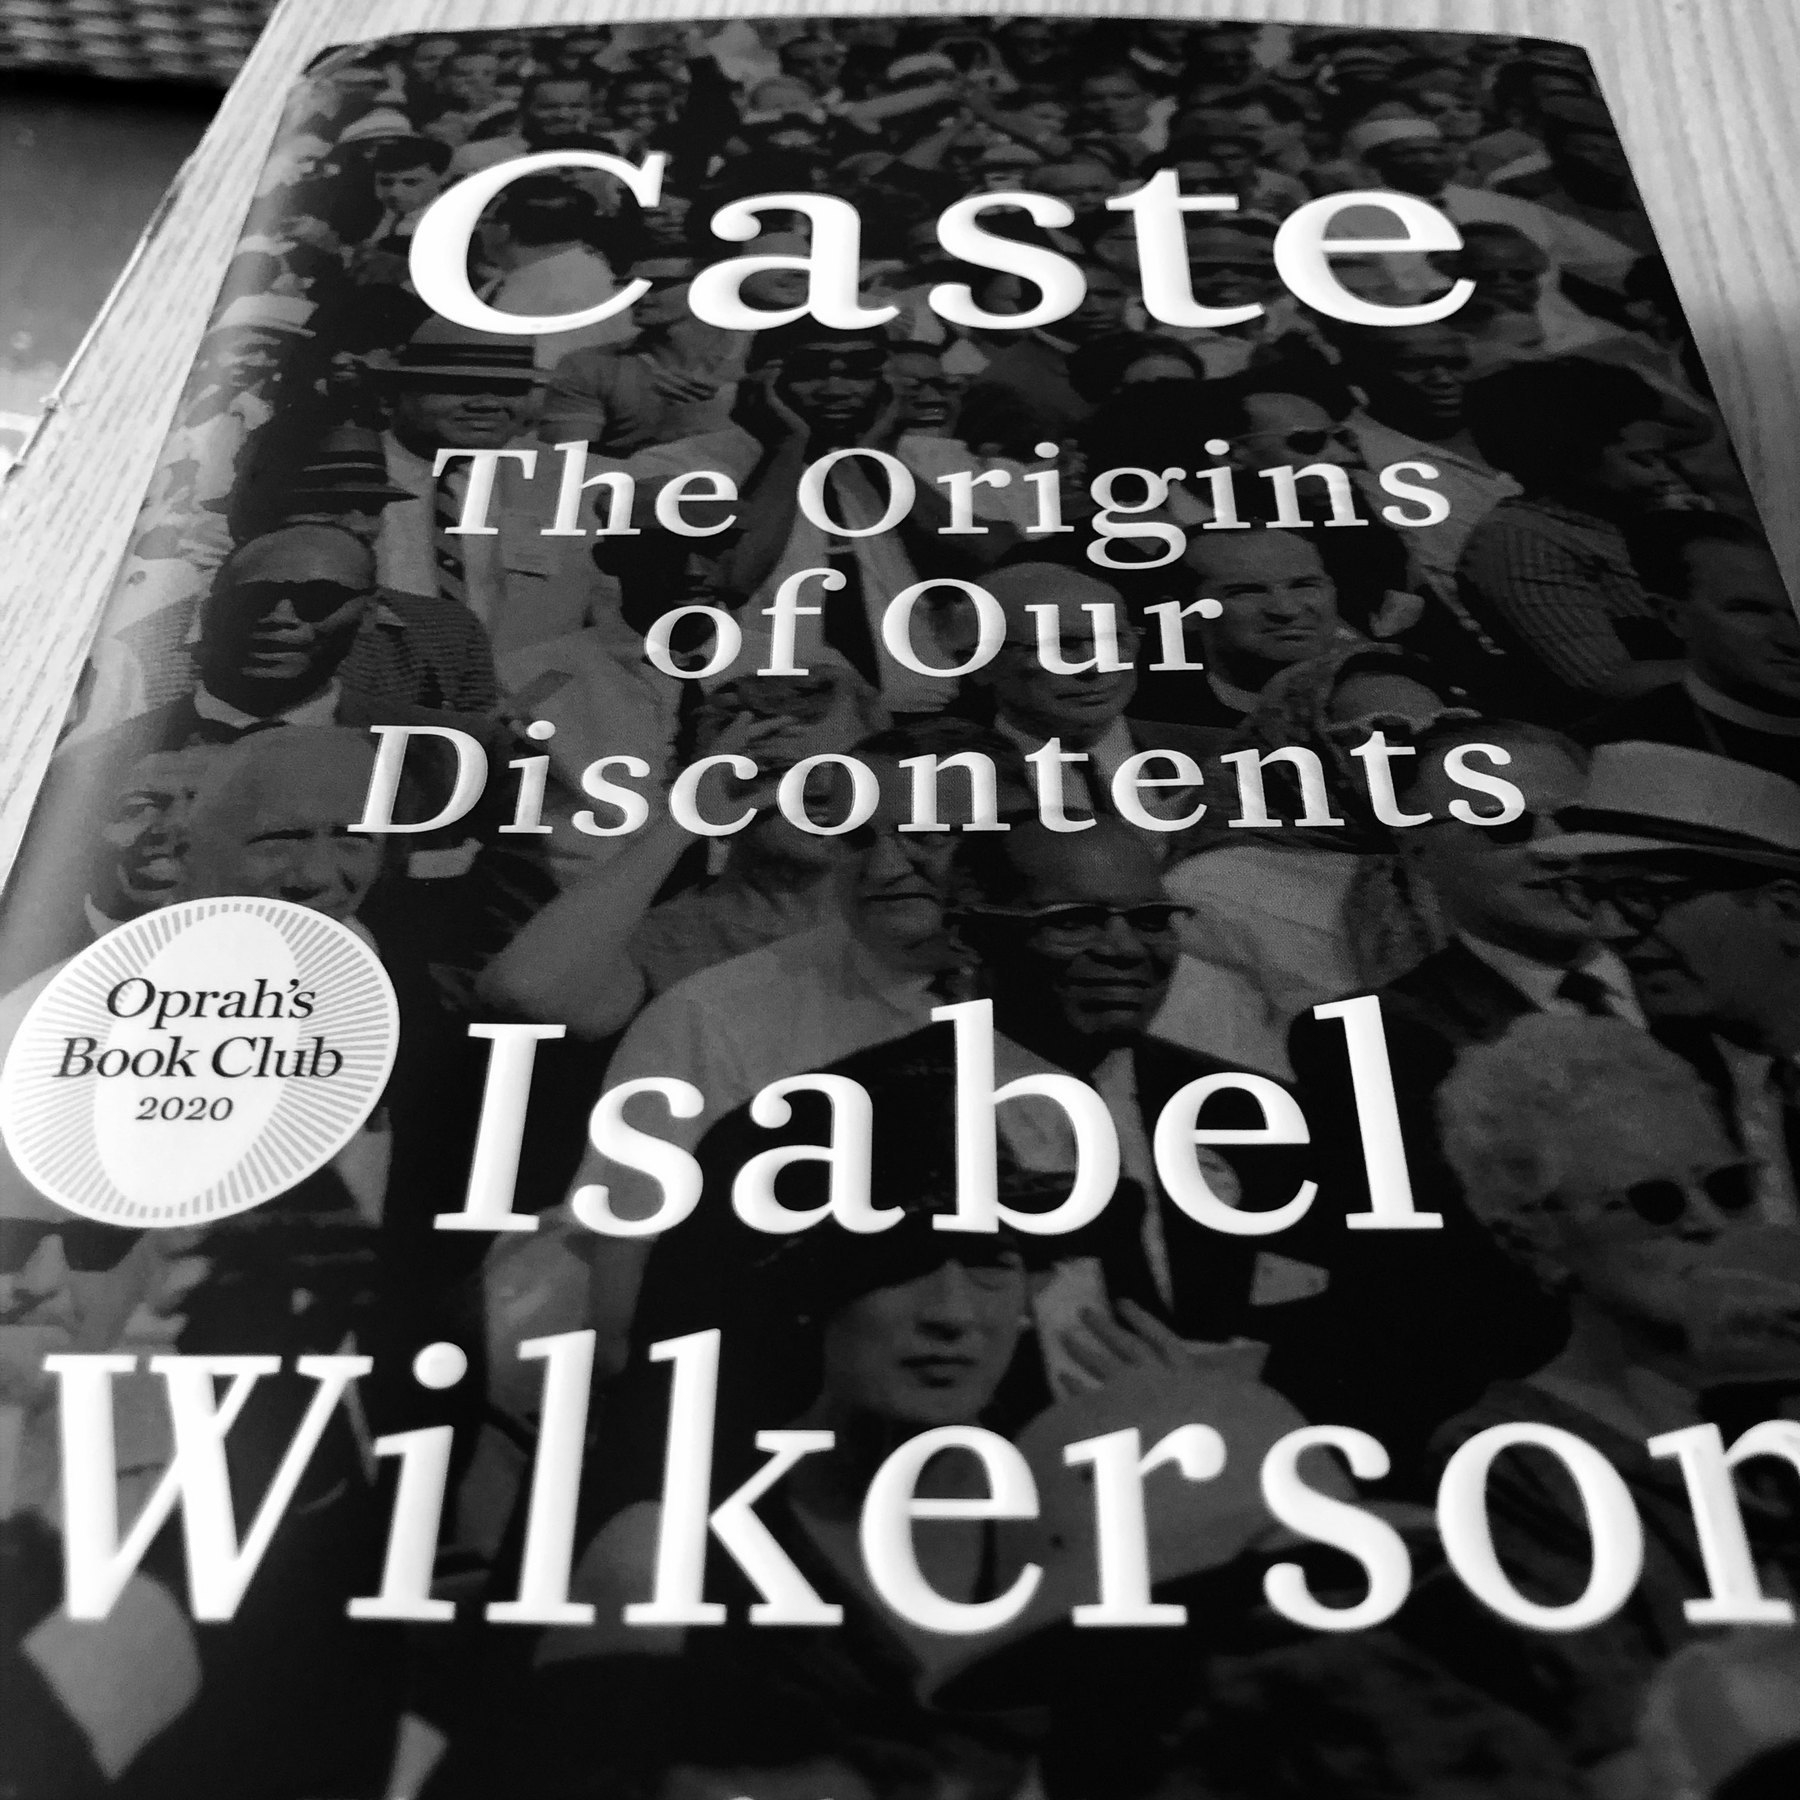 Caste, by Isabel Wilkerson